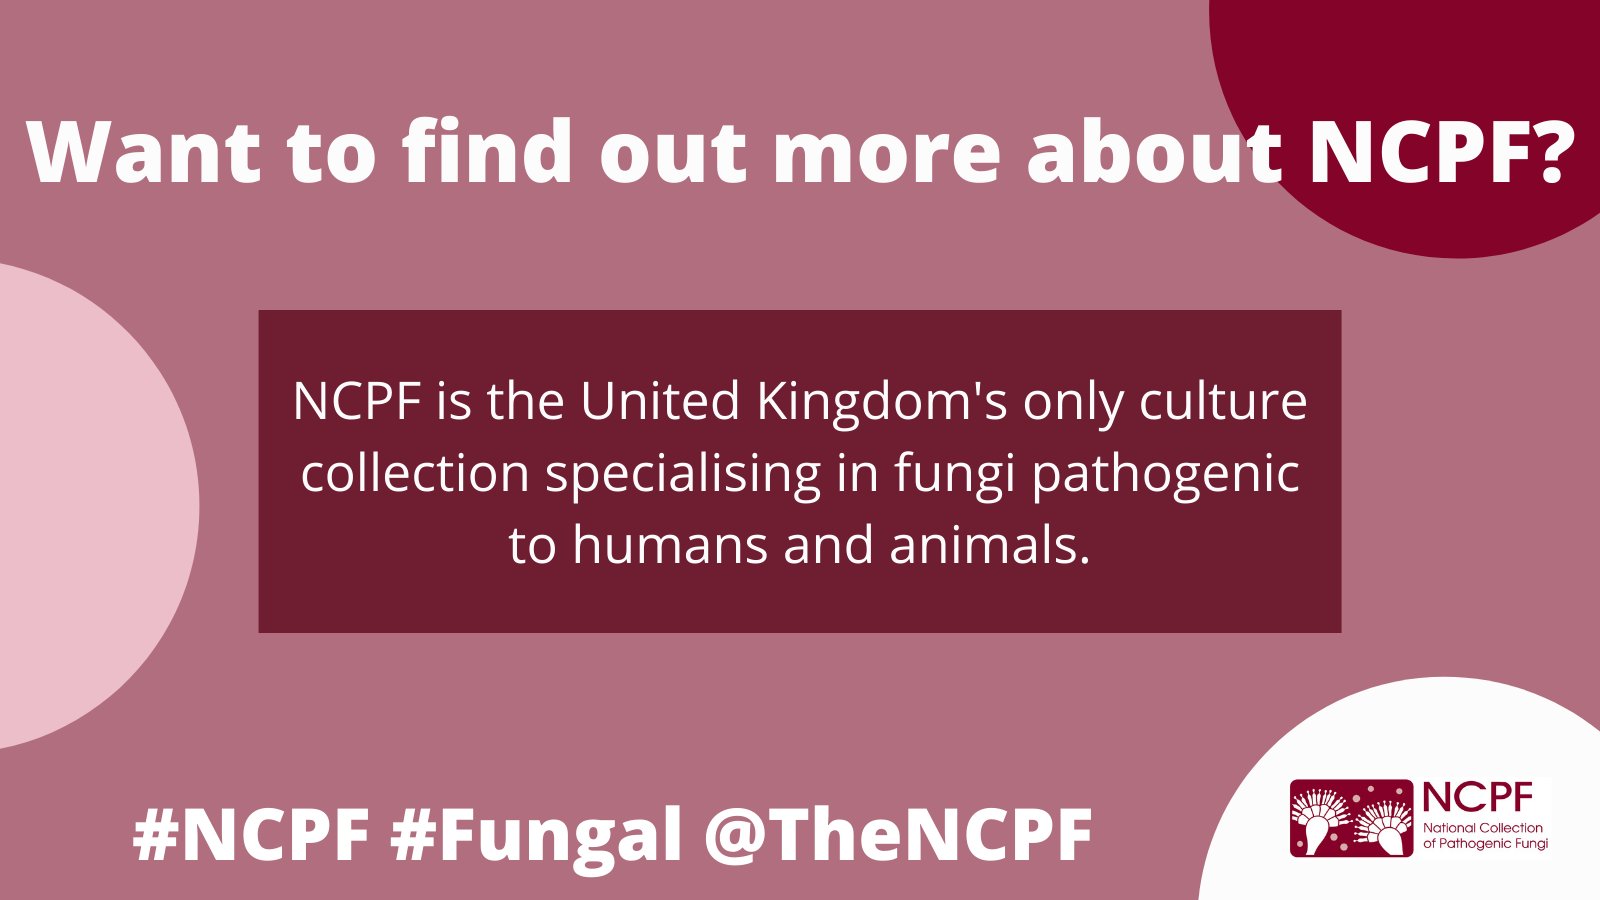 National Collection of Pathogenic Fungi (@TheNCPF) / Twitter